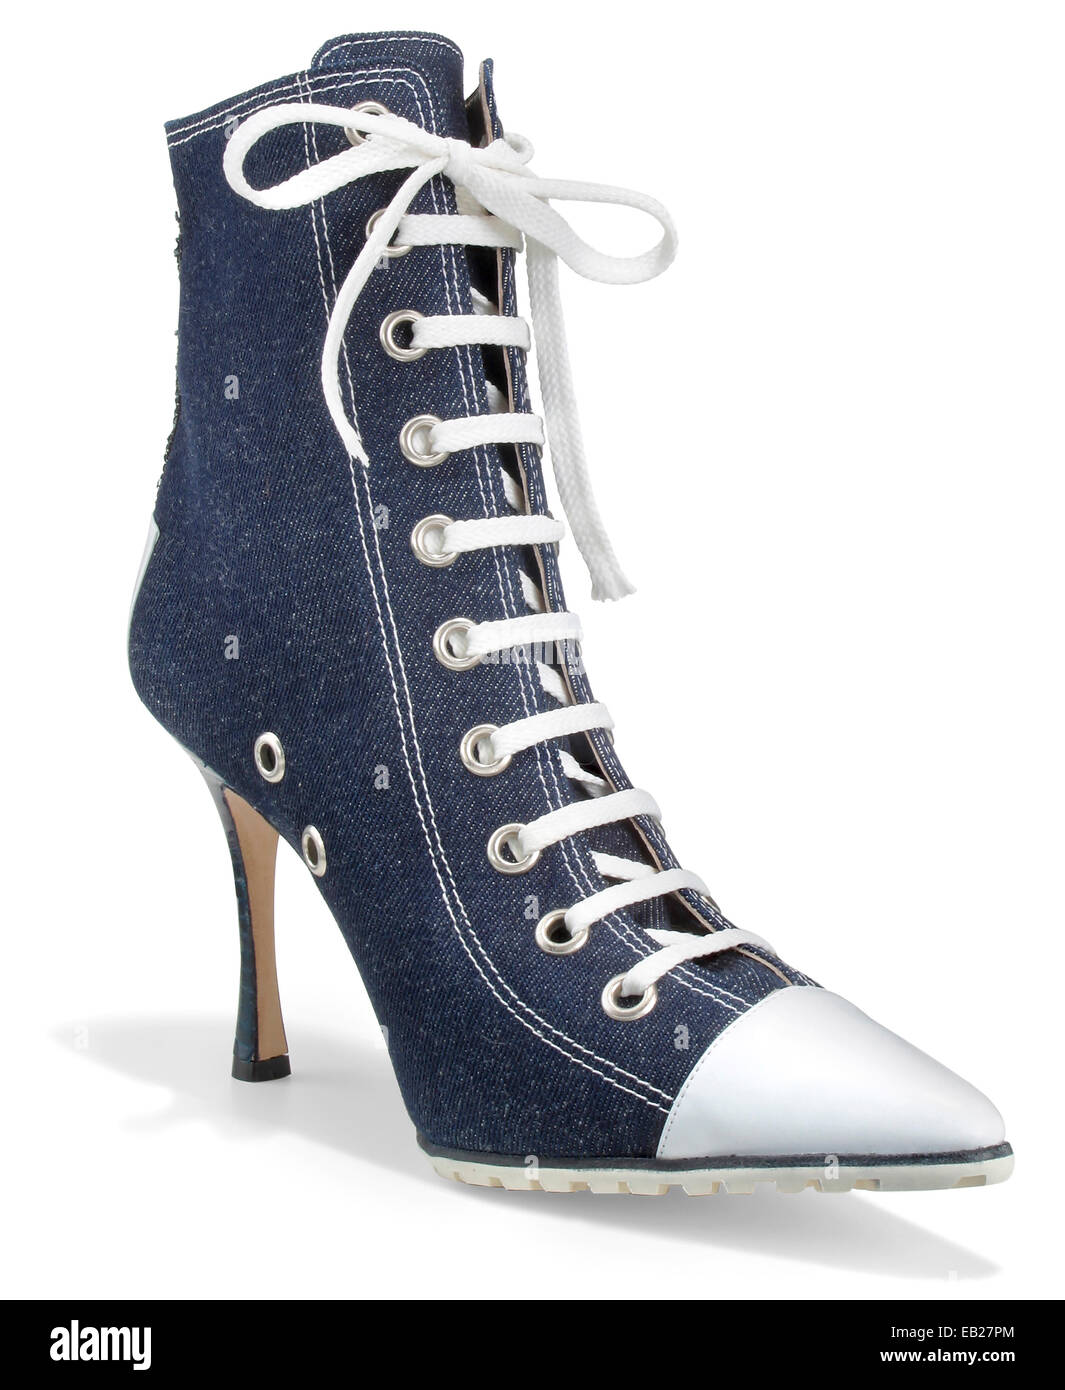 manolo blahnik denim high heeled work boot photographed on a white background Stock Photo